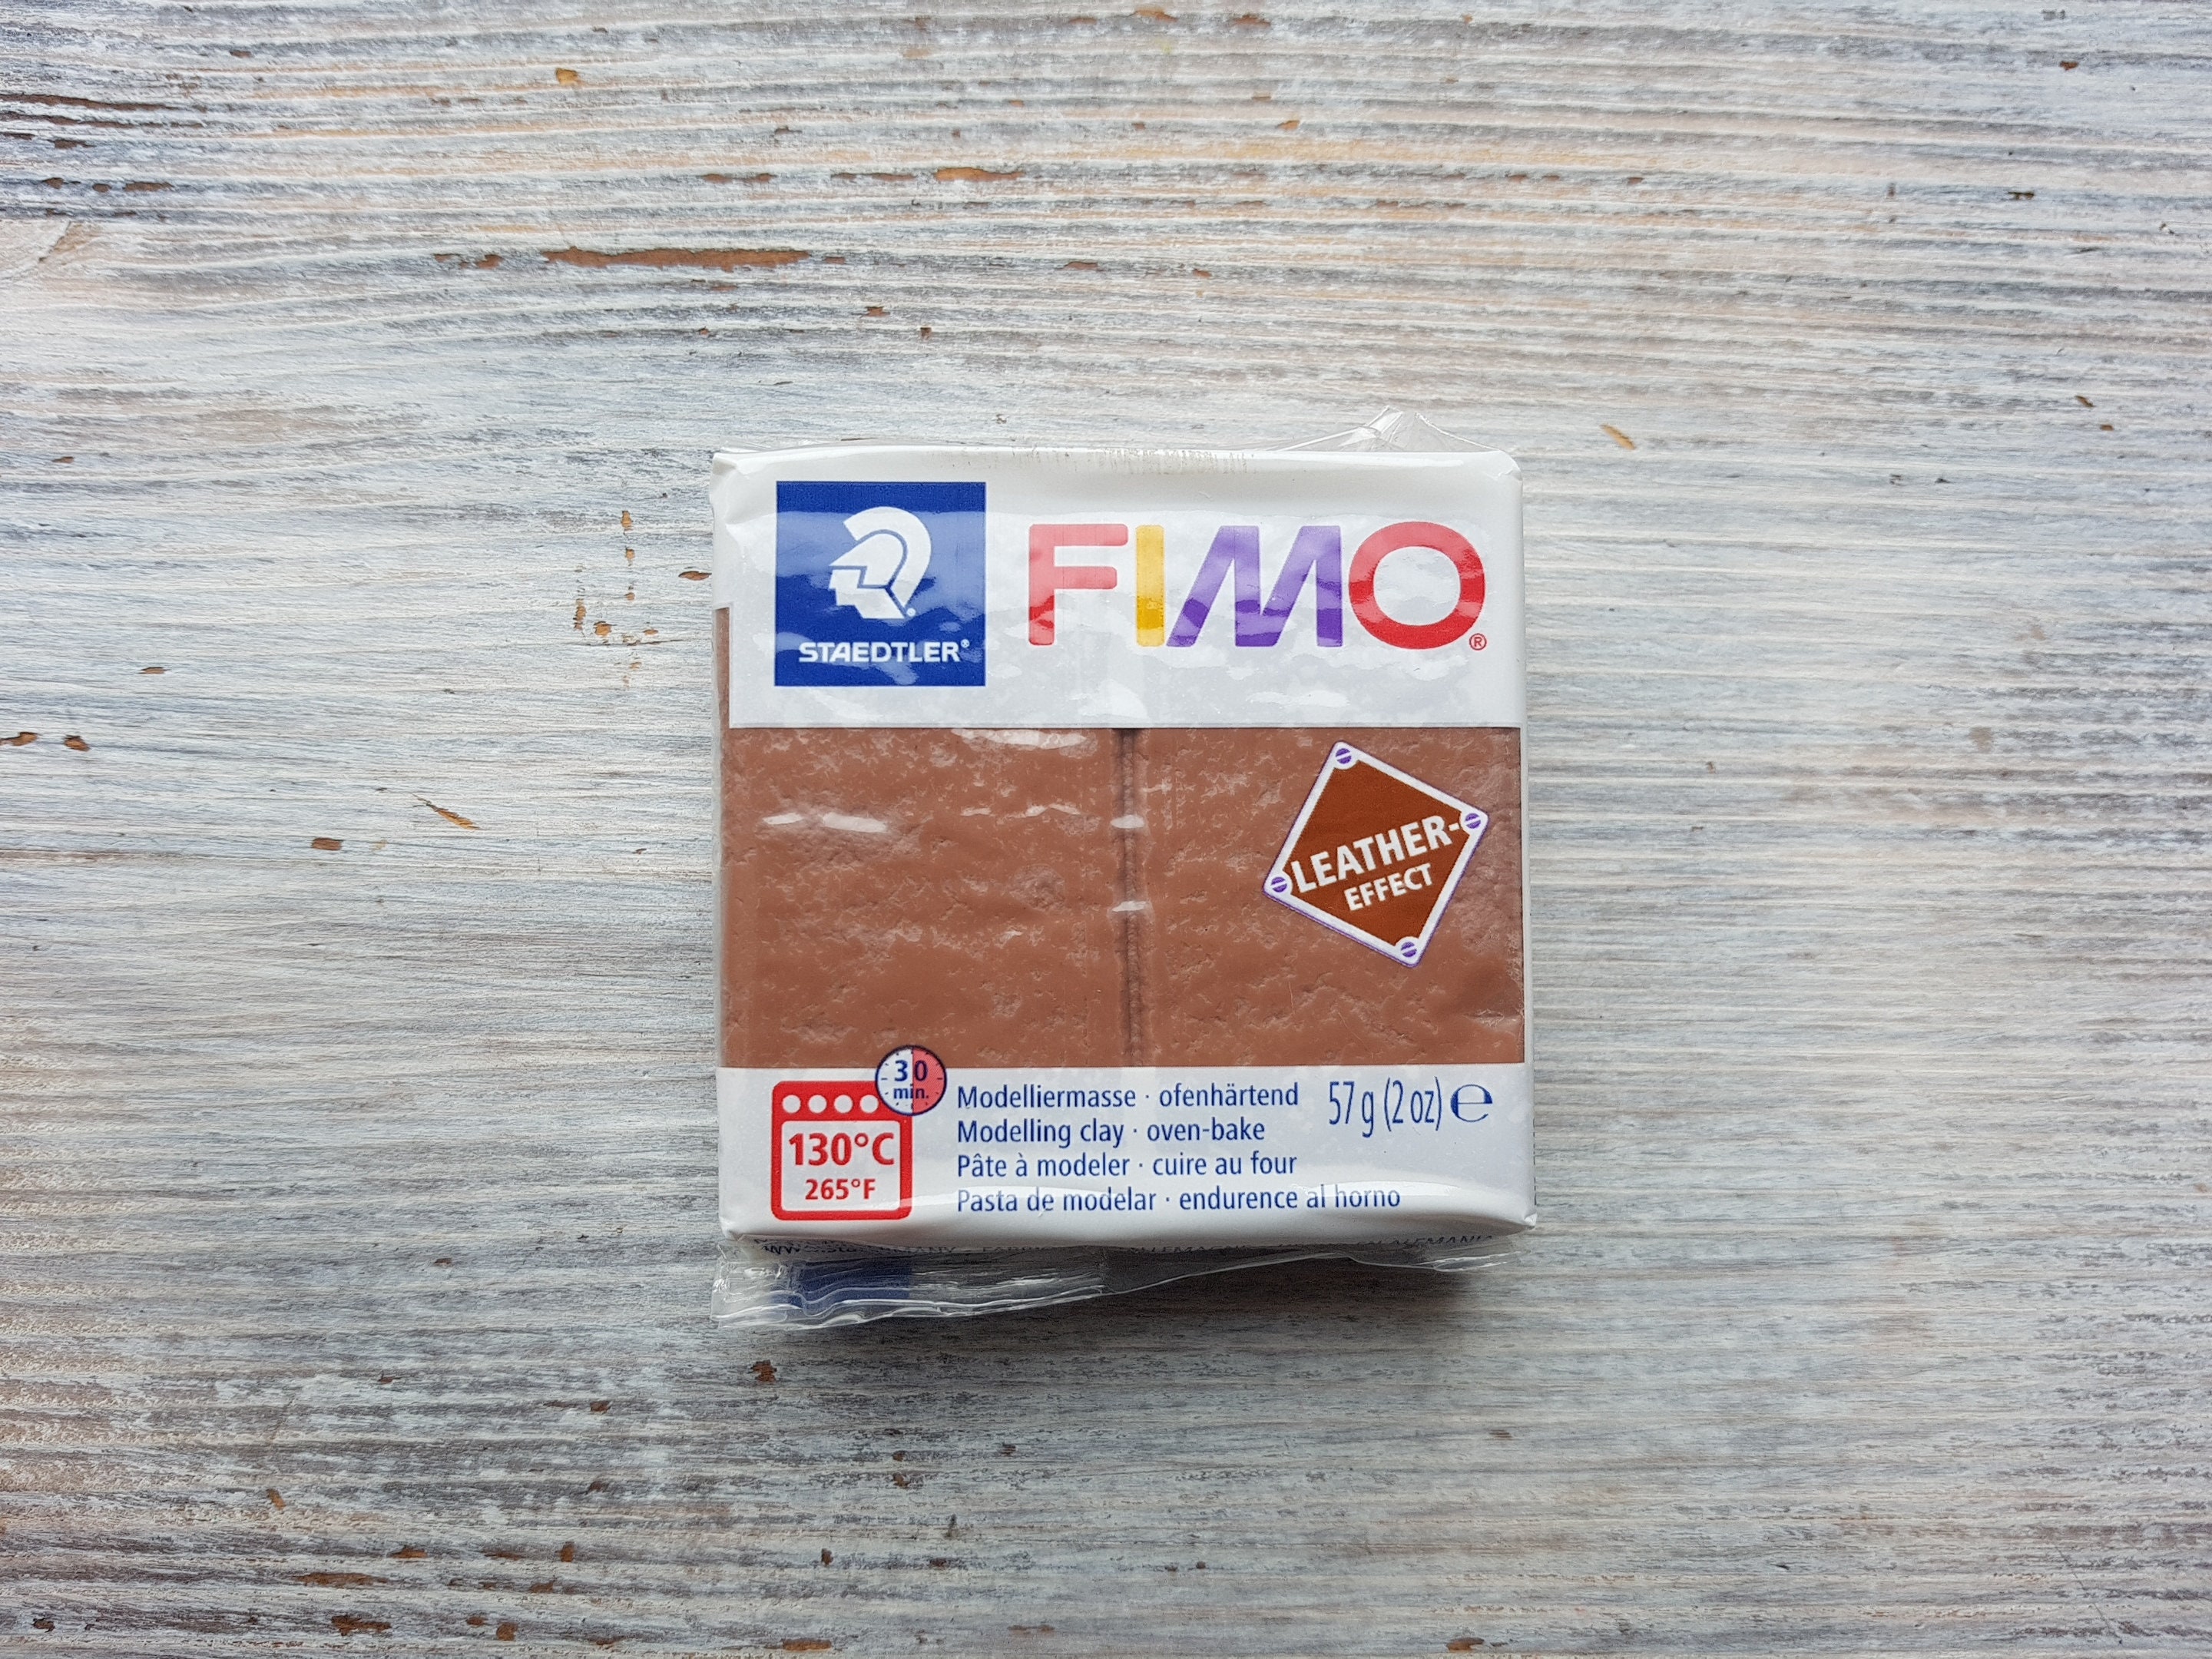 Fimo Leather Polymer Clay Set, 12 Colors 25g, Oven-hardening